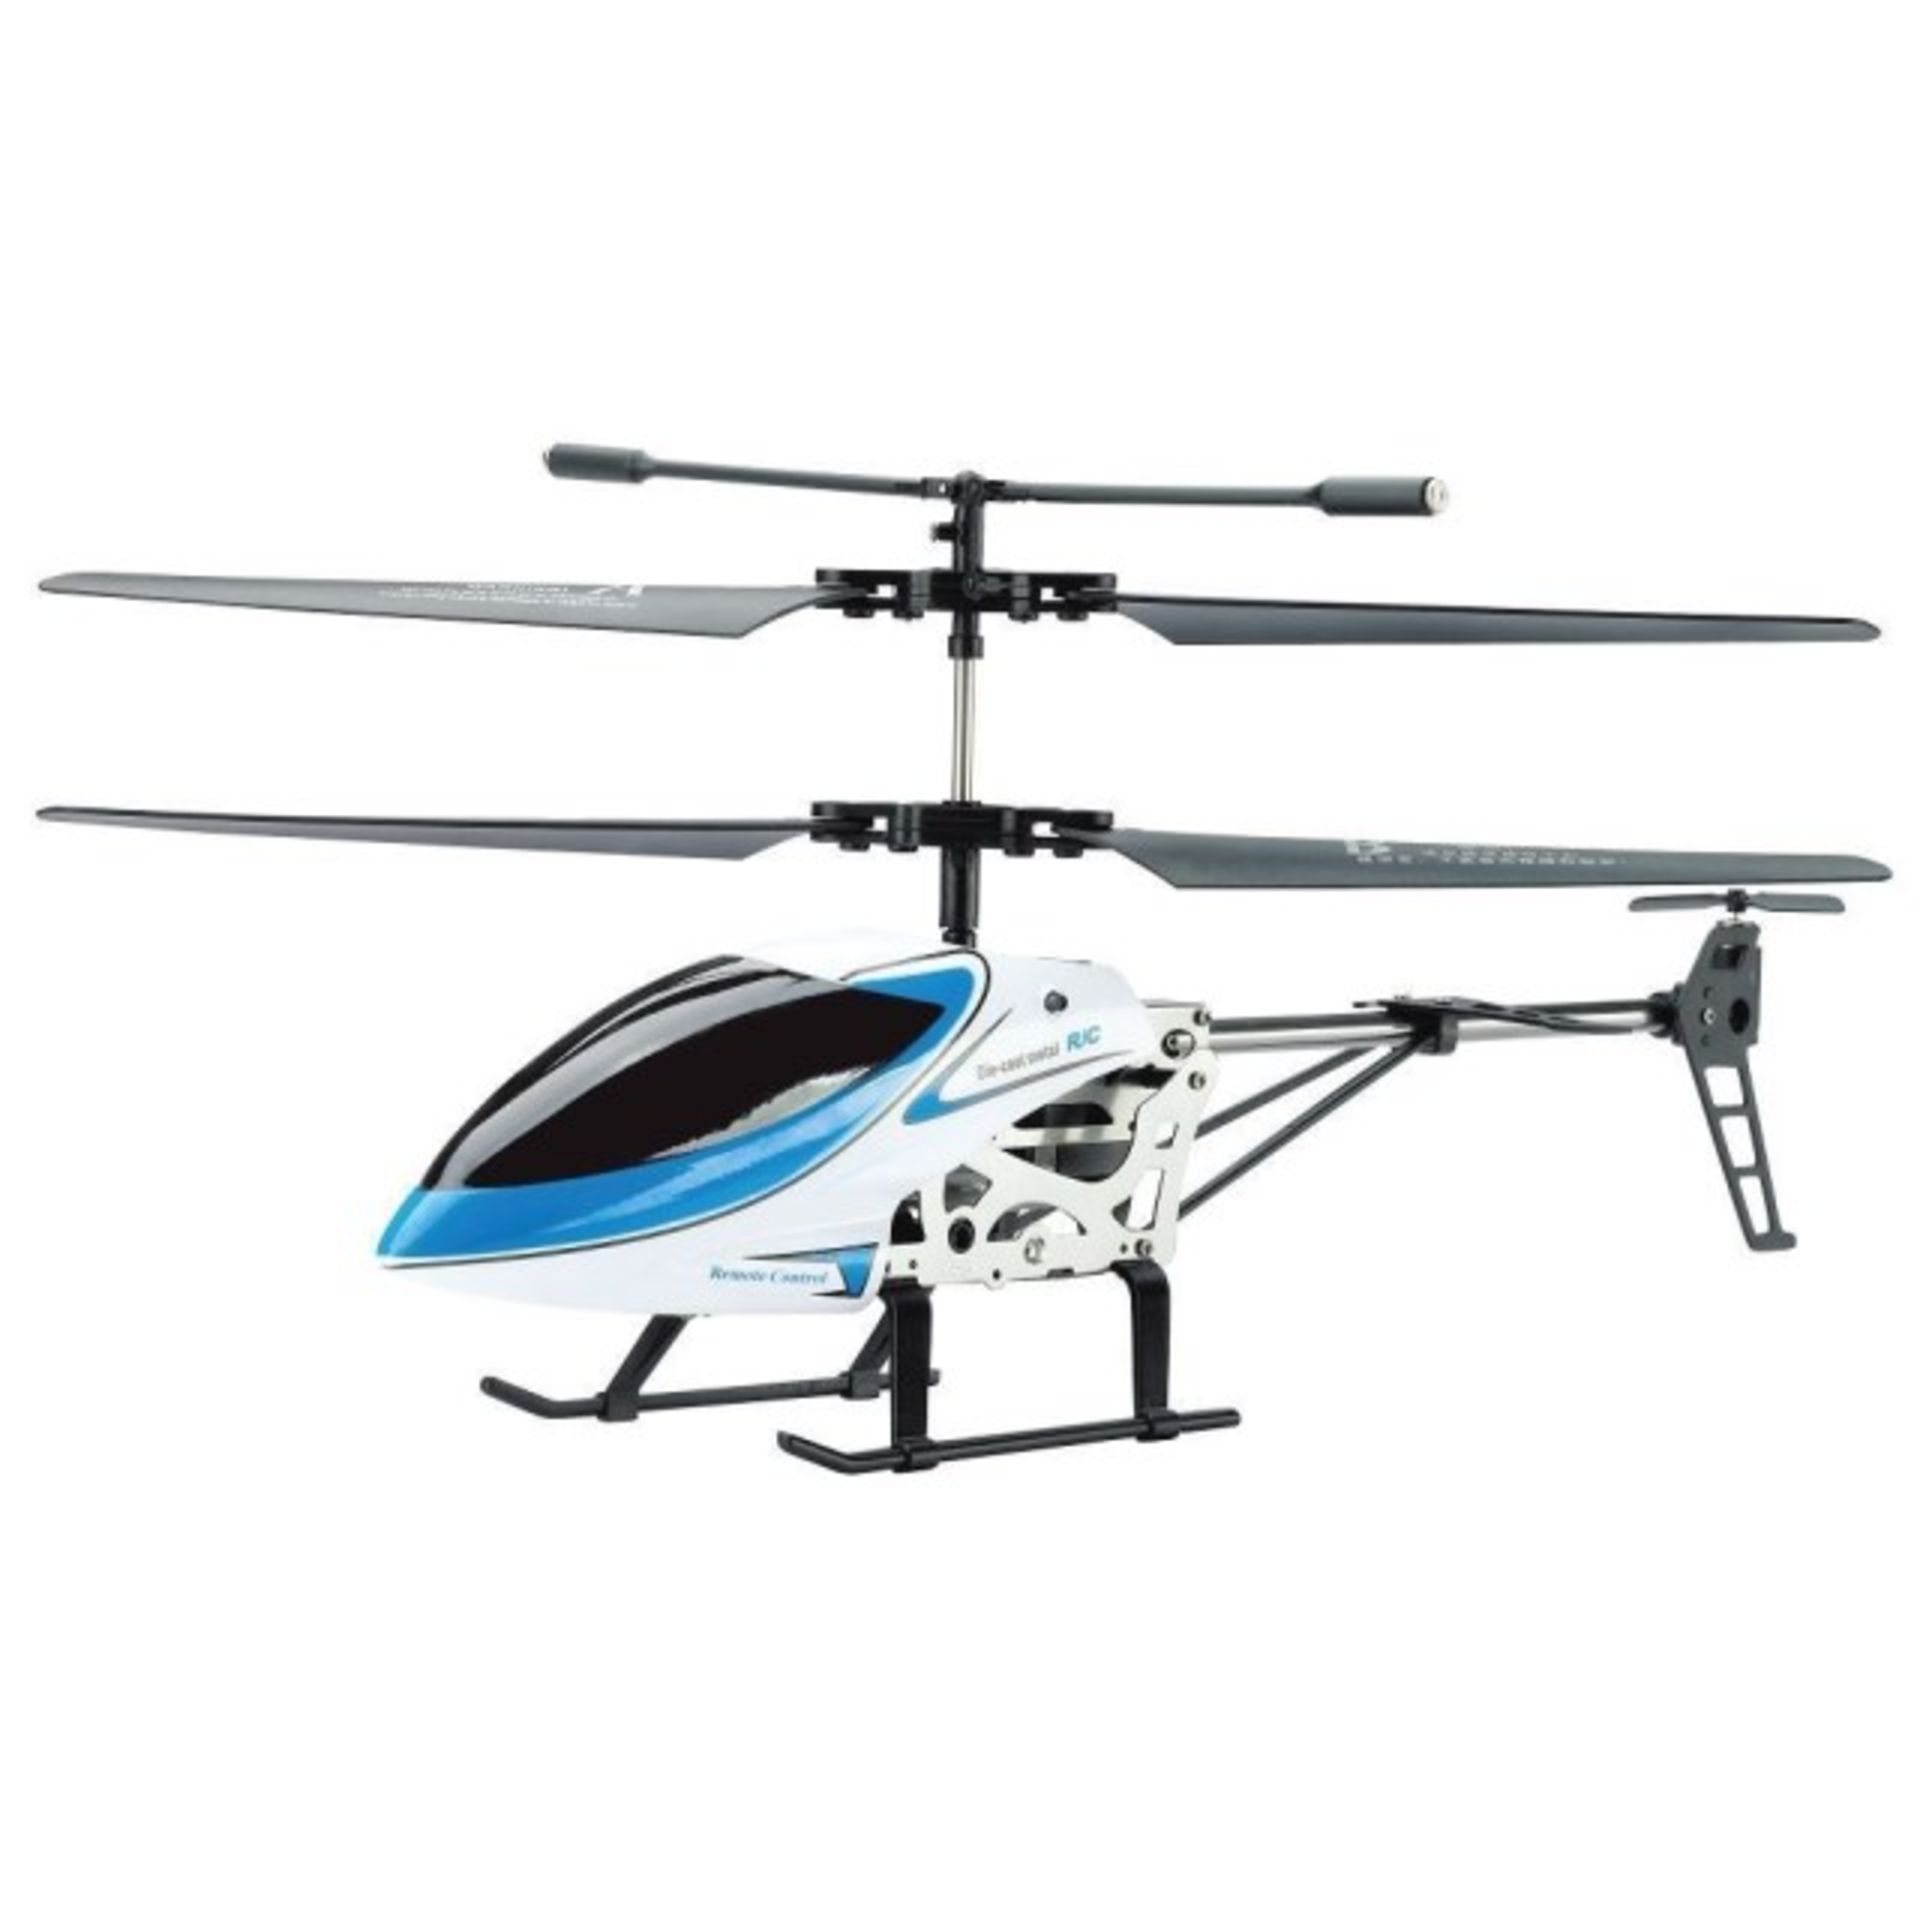 + VAT Brand New 3.5 Channel Infra-Red Control Helicopter Super Steady Rotor Blade System Die cast - Image 2 of 2